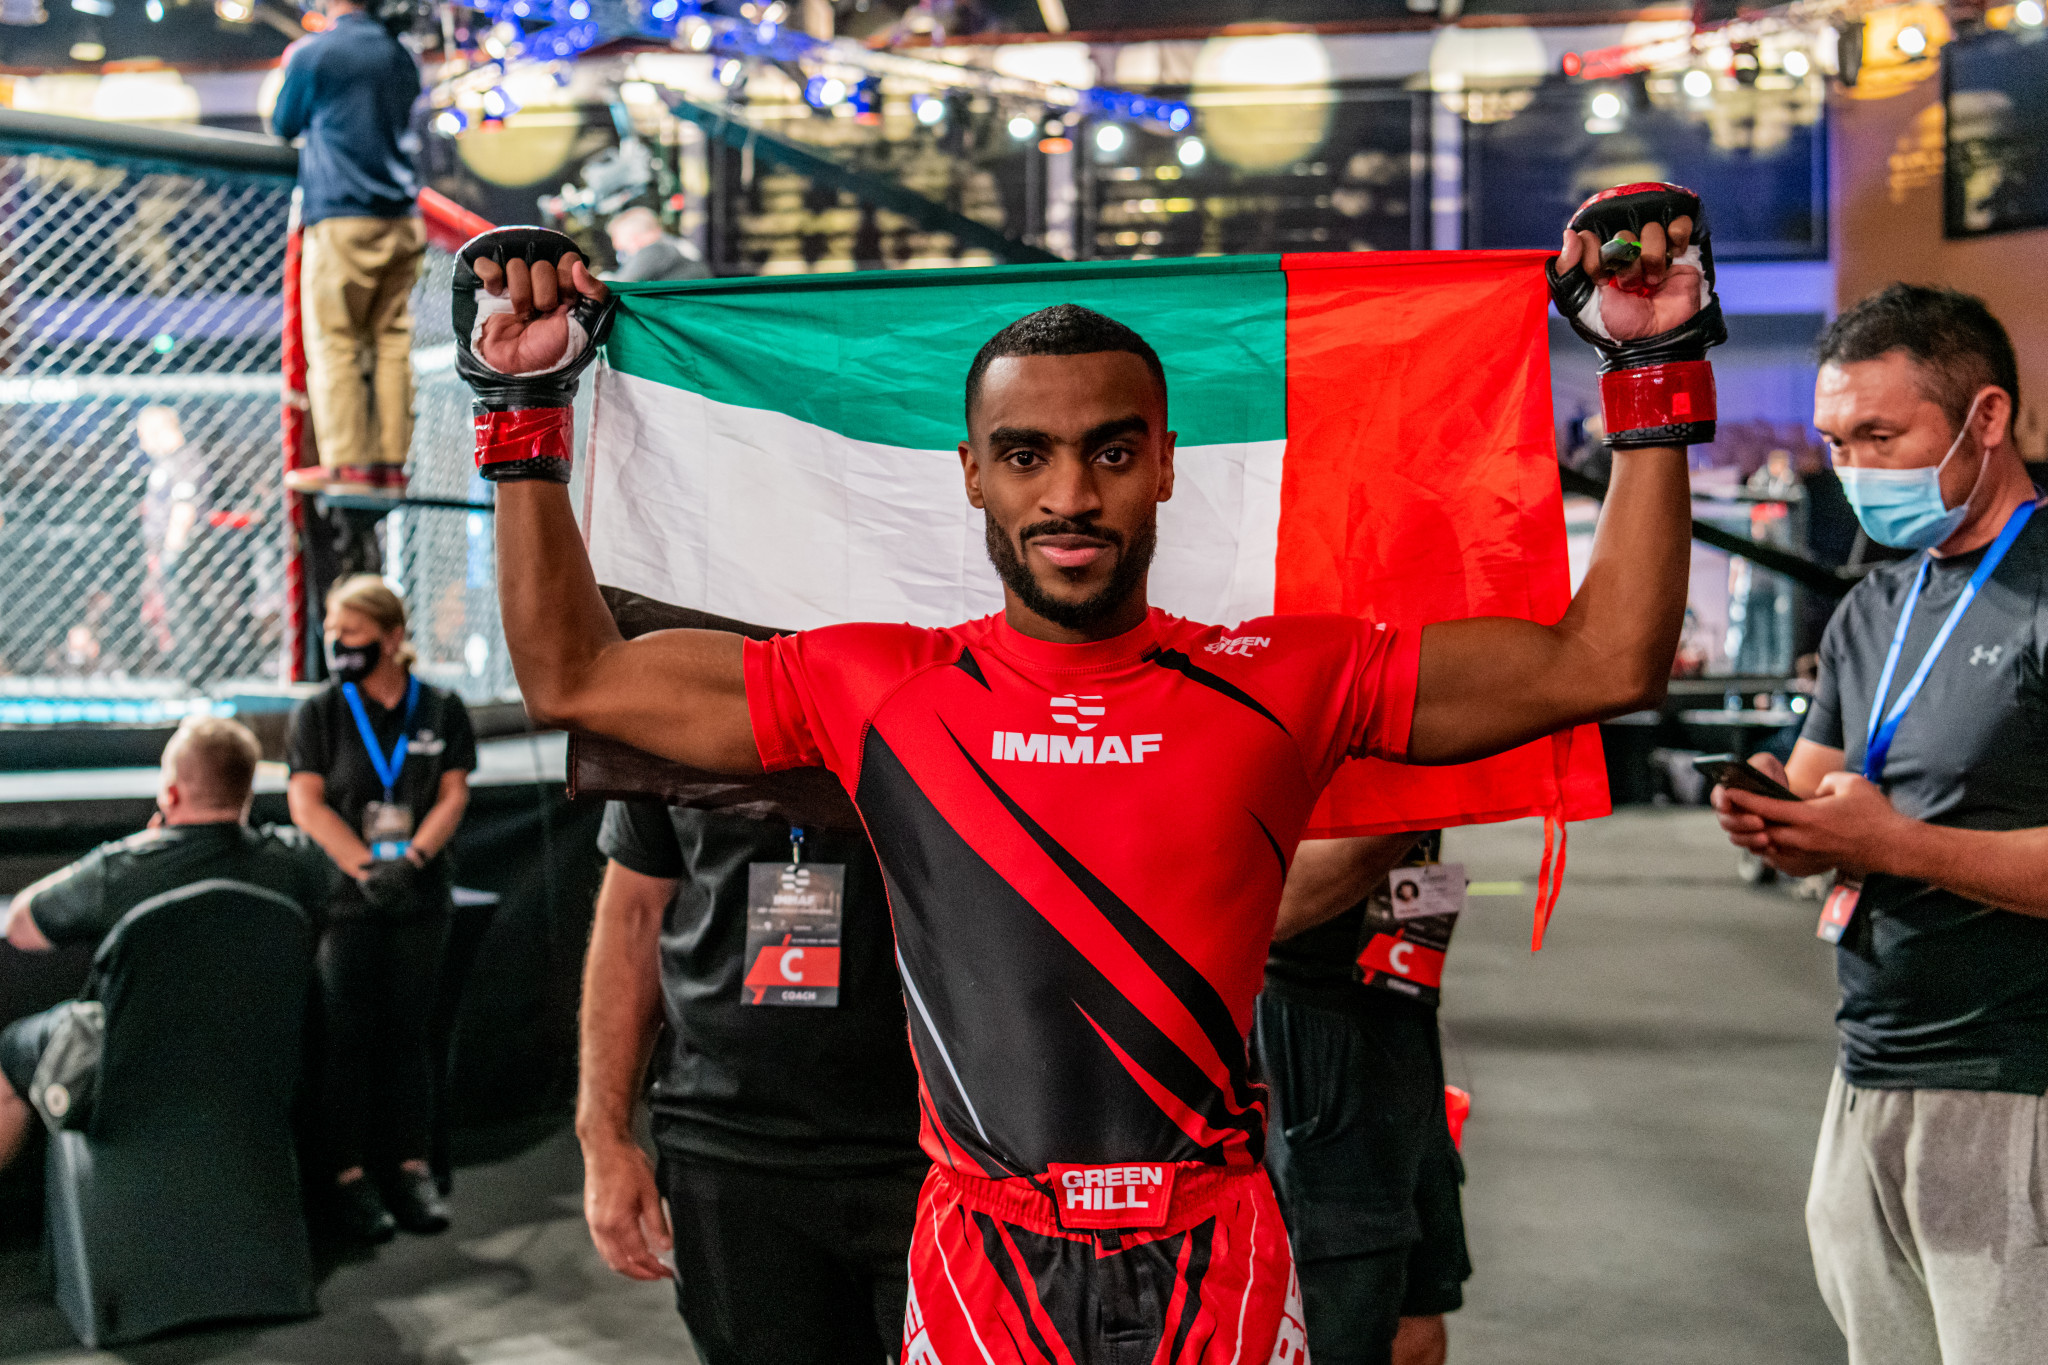 UAE MMA is hoping to make strides ©IMMAF